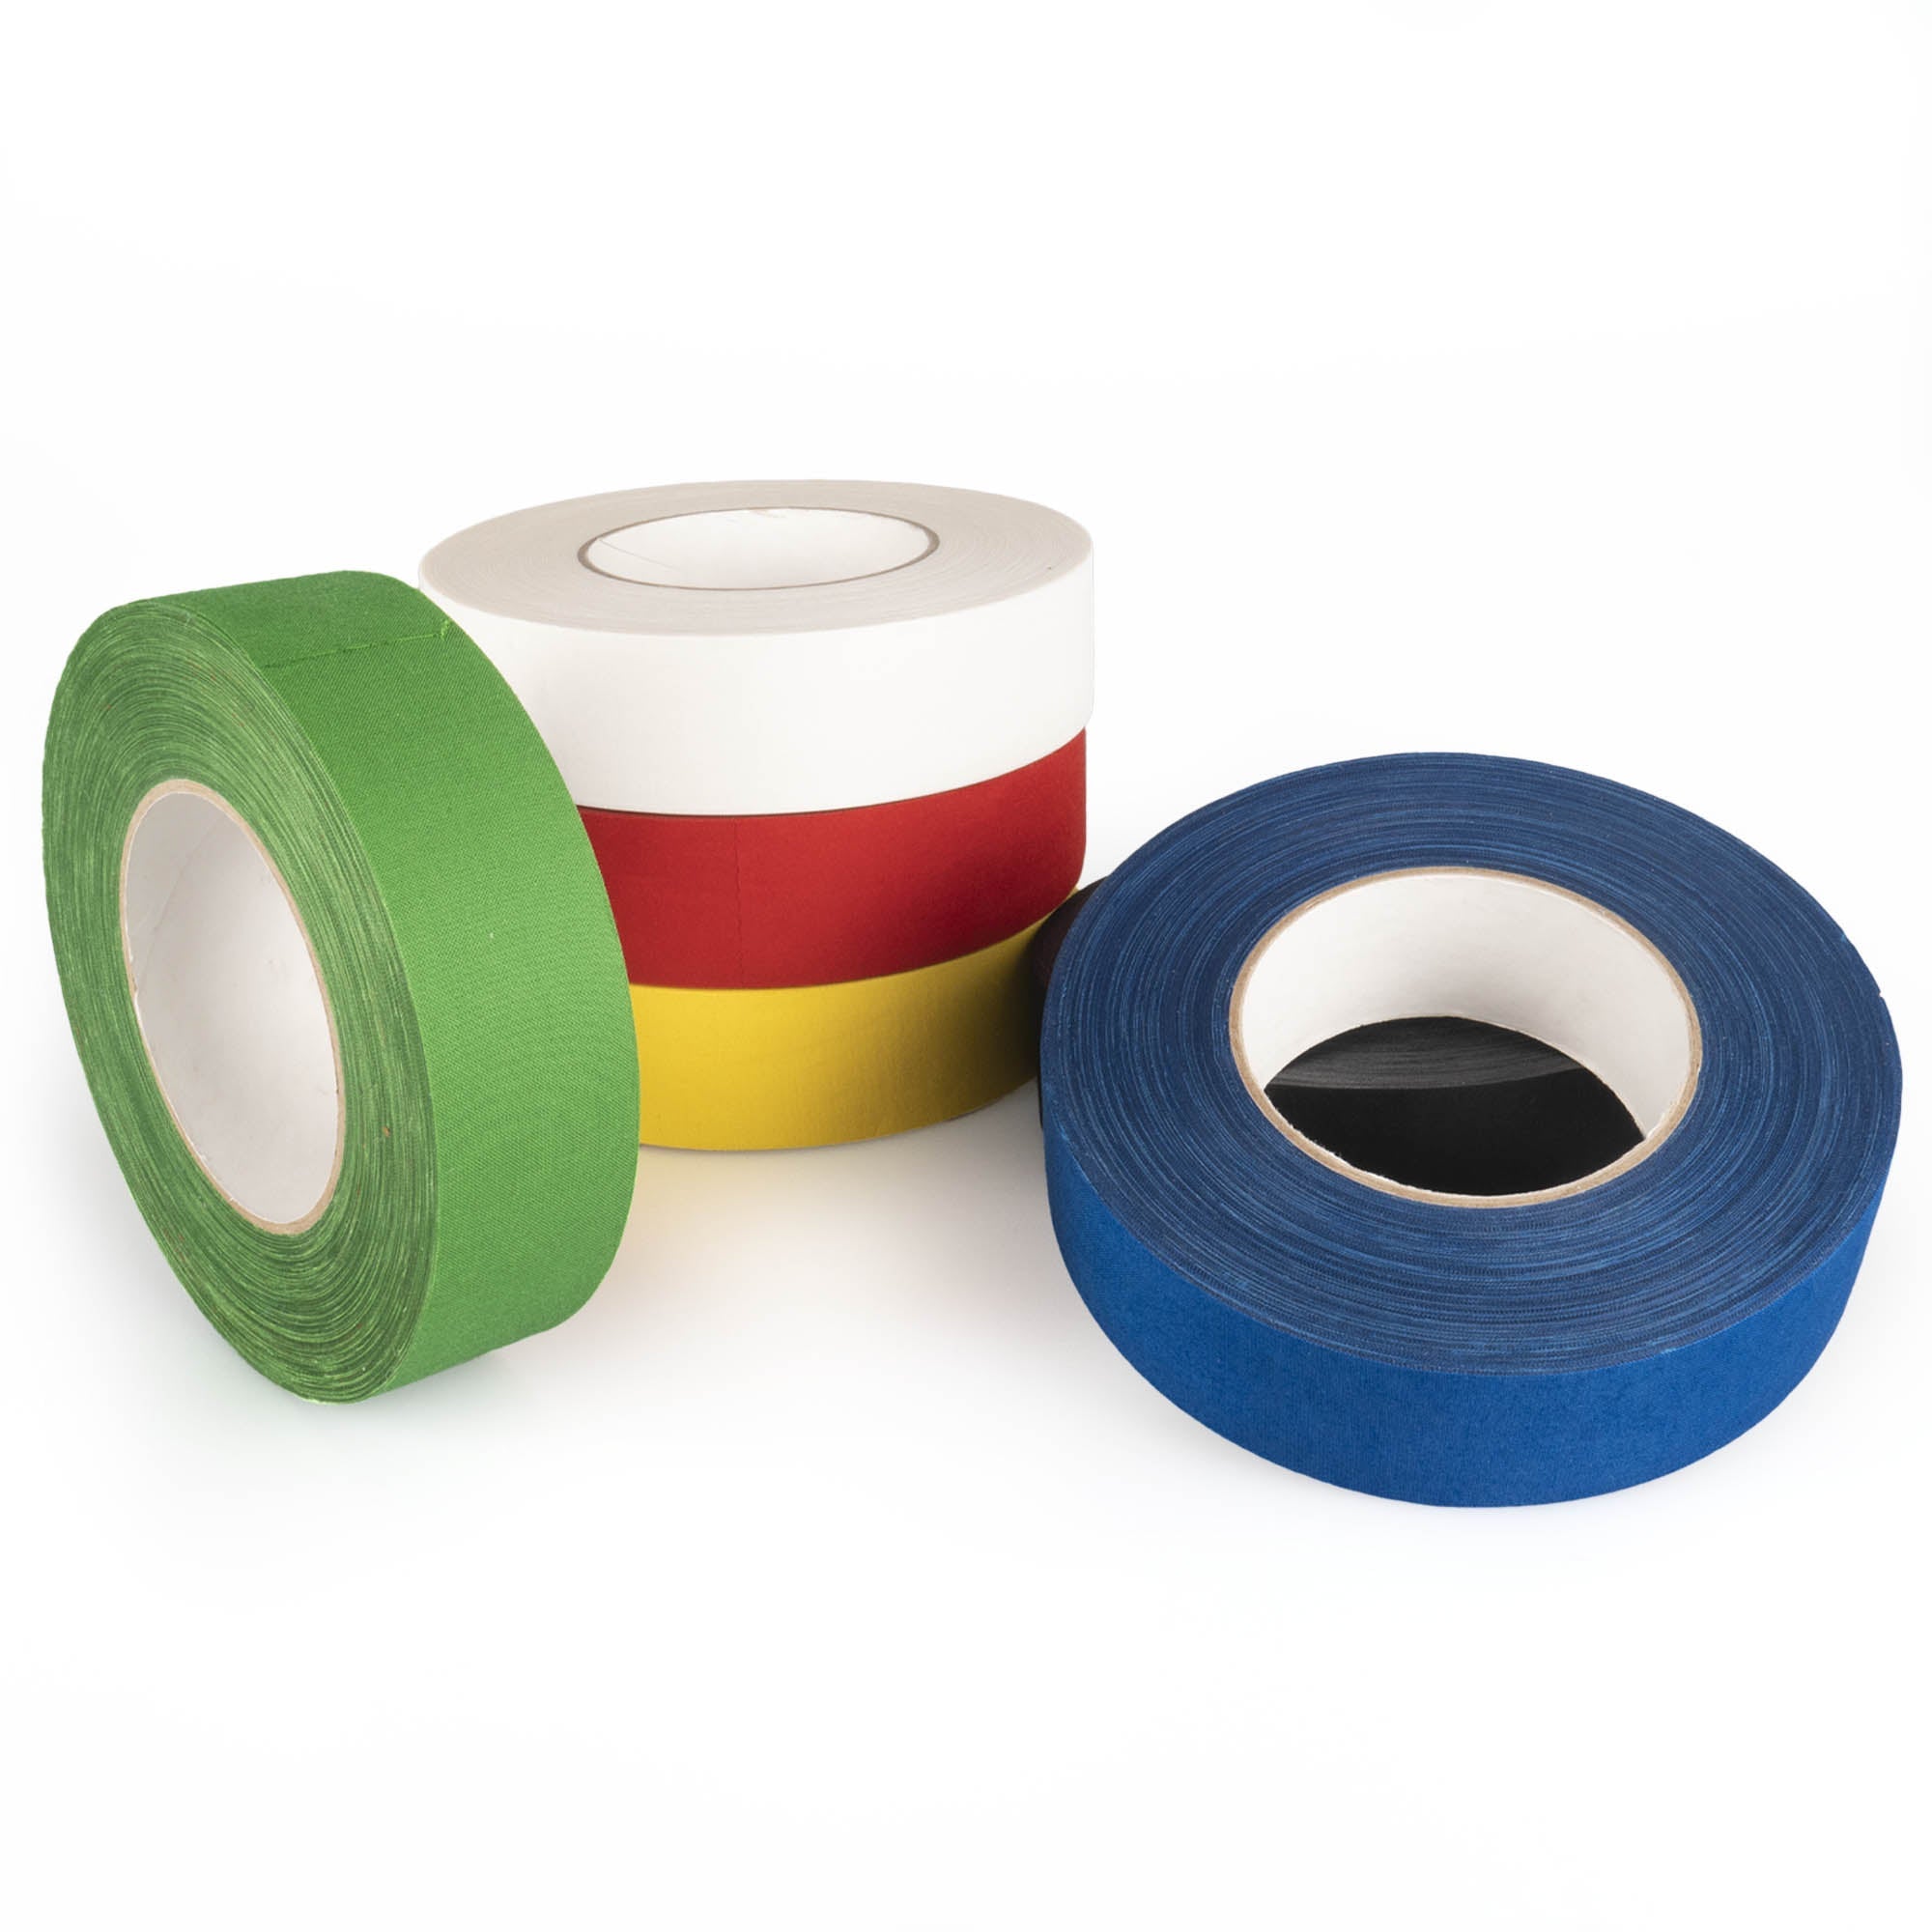 assorted 3.8cm wide tape